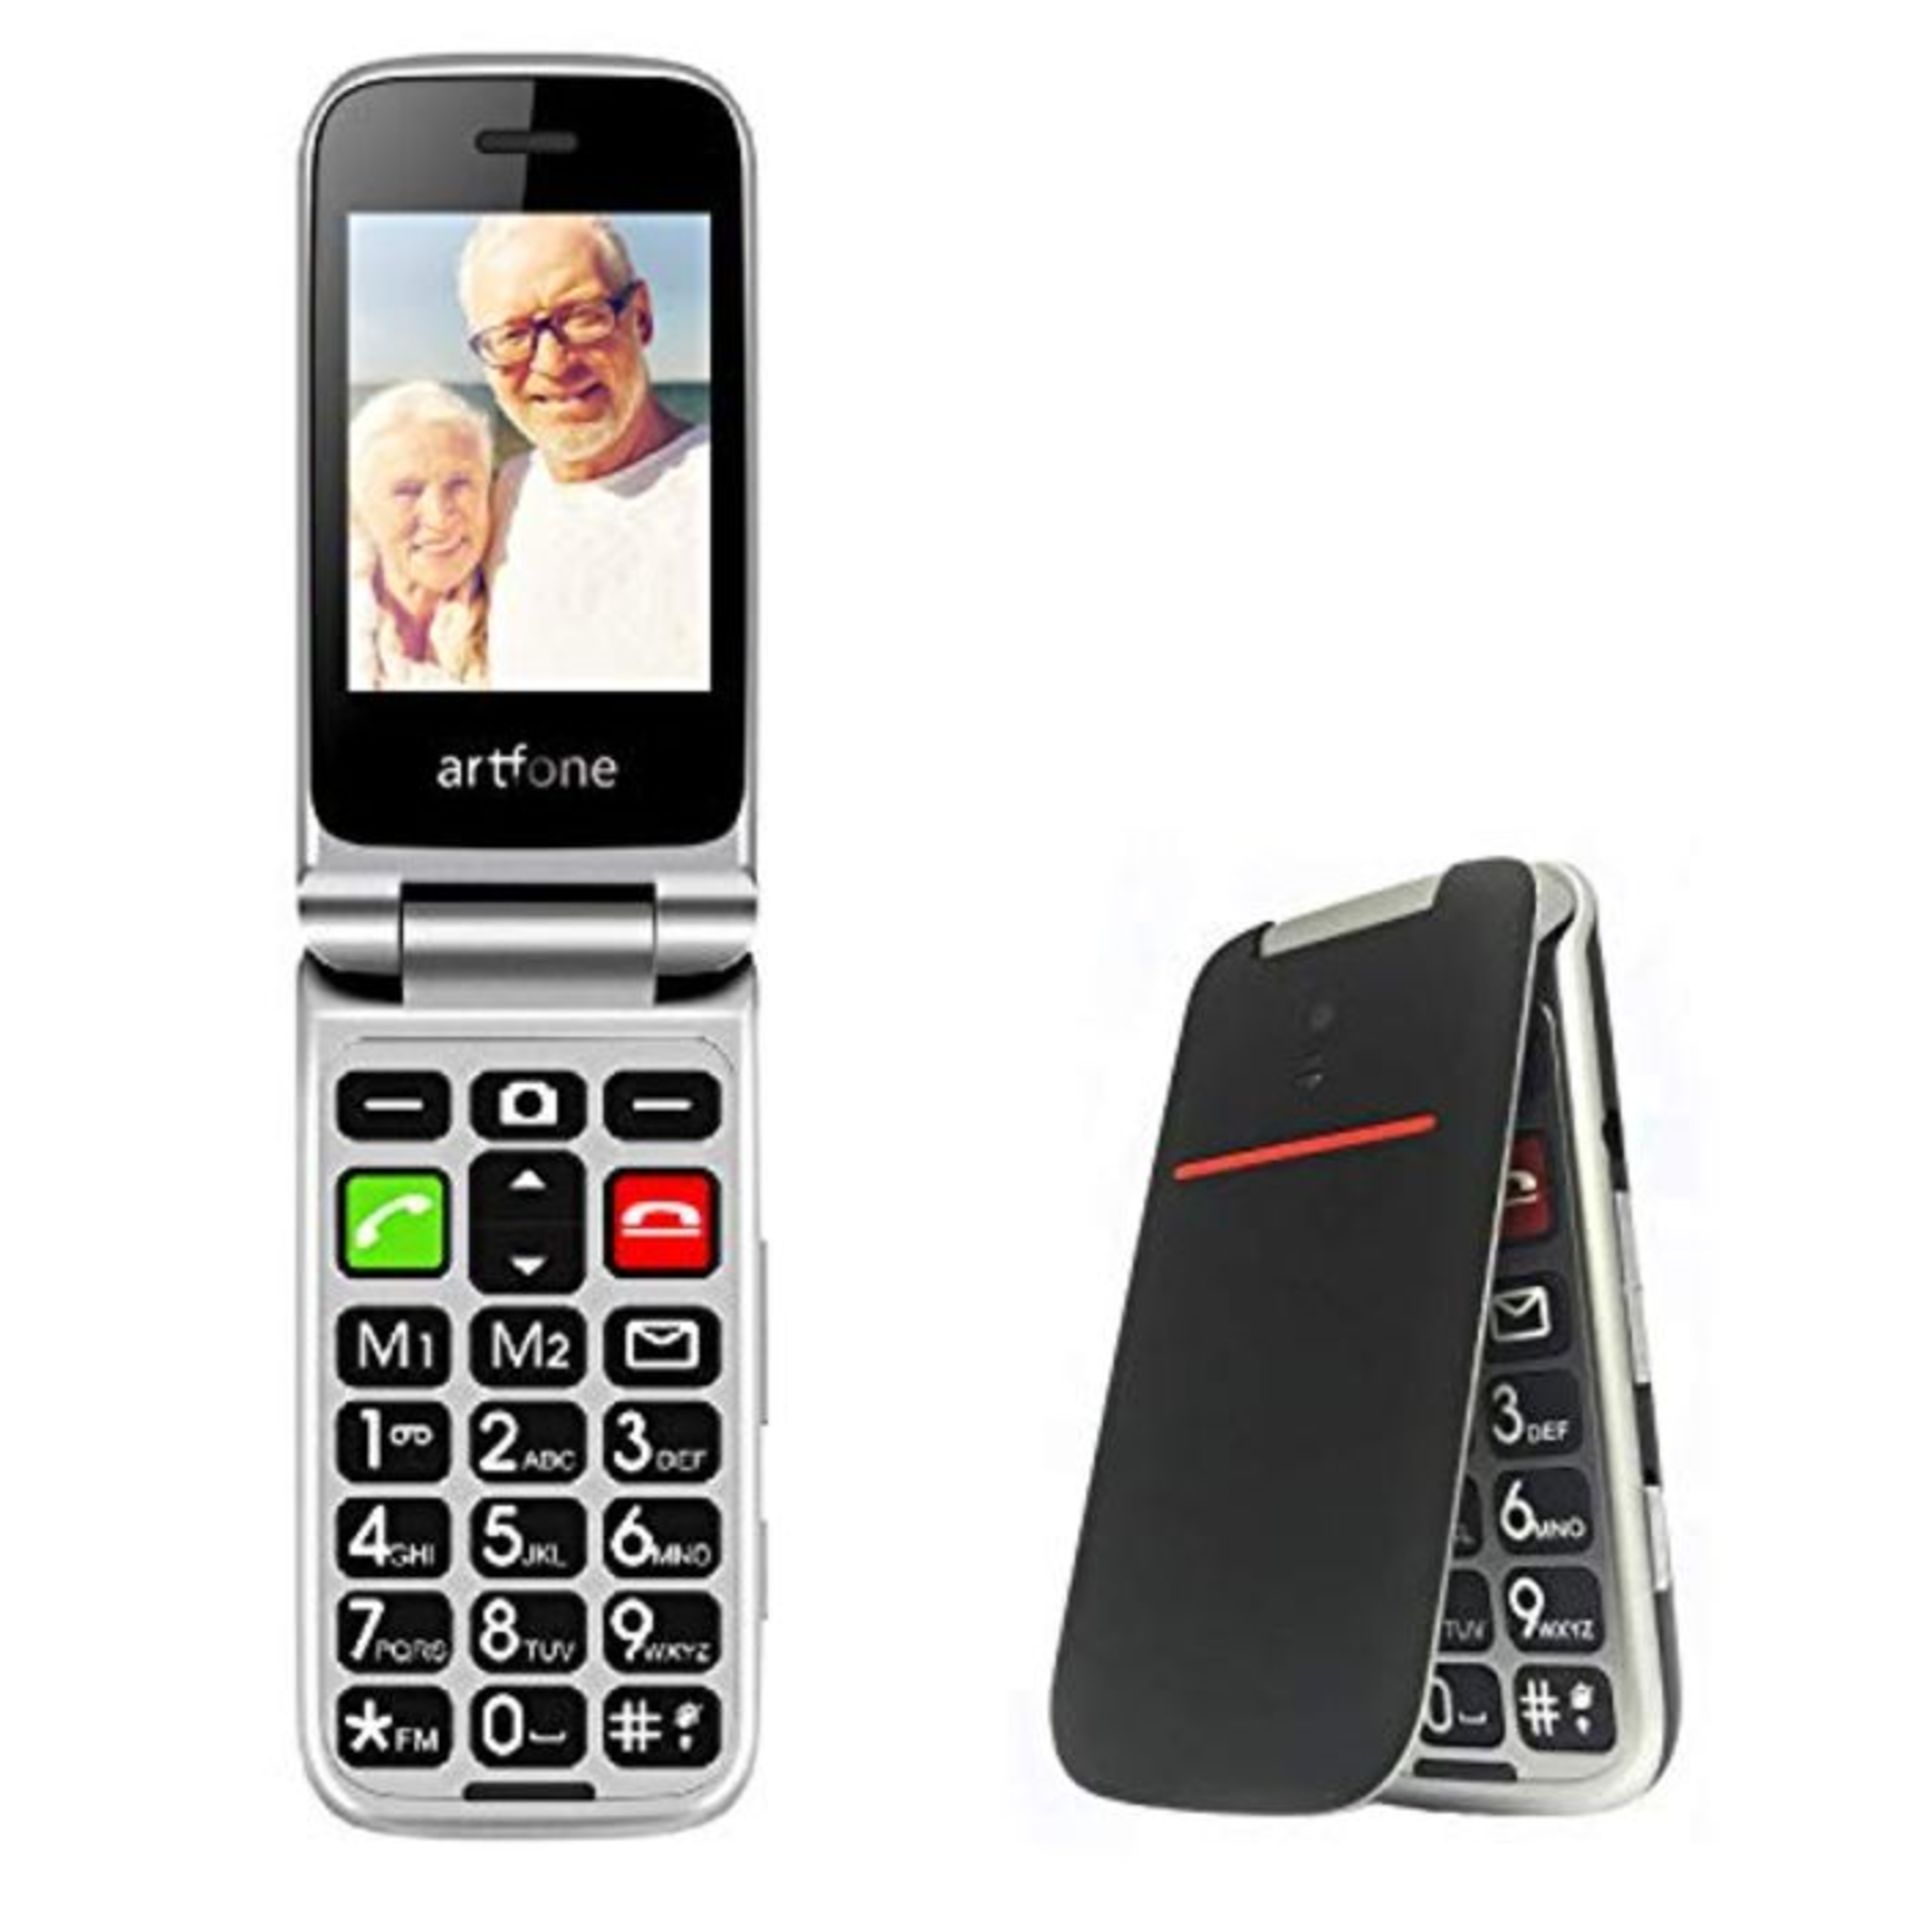 artfone Big Button Mobile Phone for Elderly, Senior Flip Mobile Phone With 2.4" LCD Di